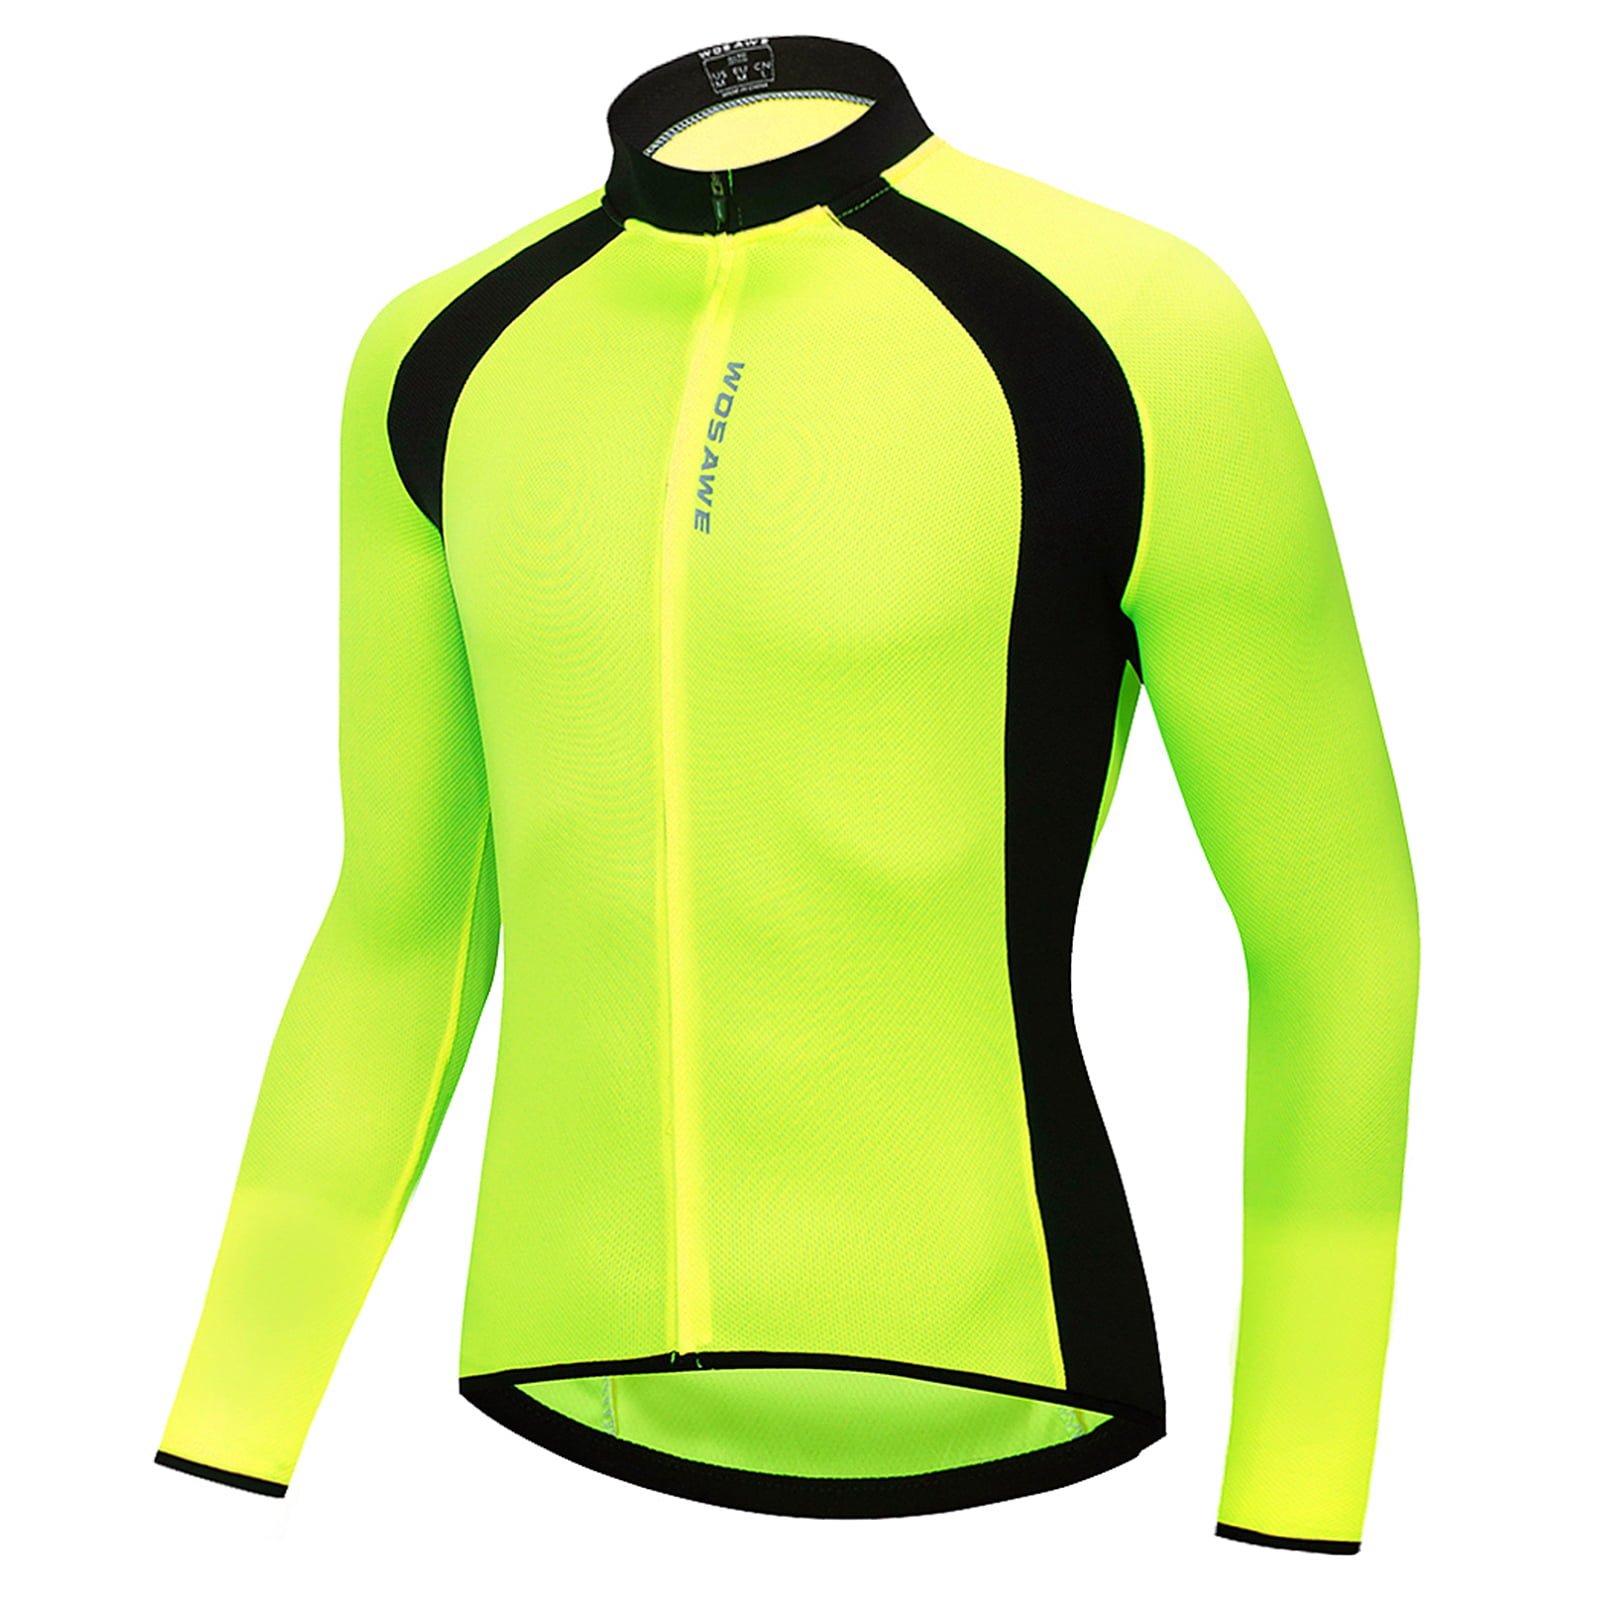 Details about   Cycling Jersey Men Women Quick Dry Breathable Long Sleeve Bike Shirt E7B0 